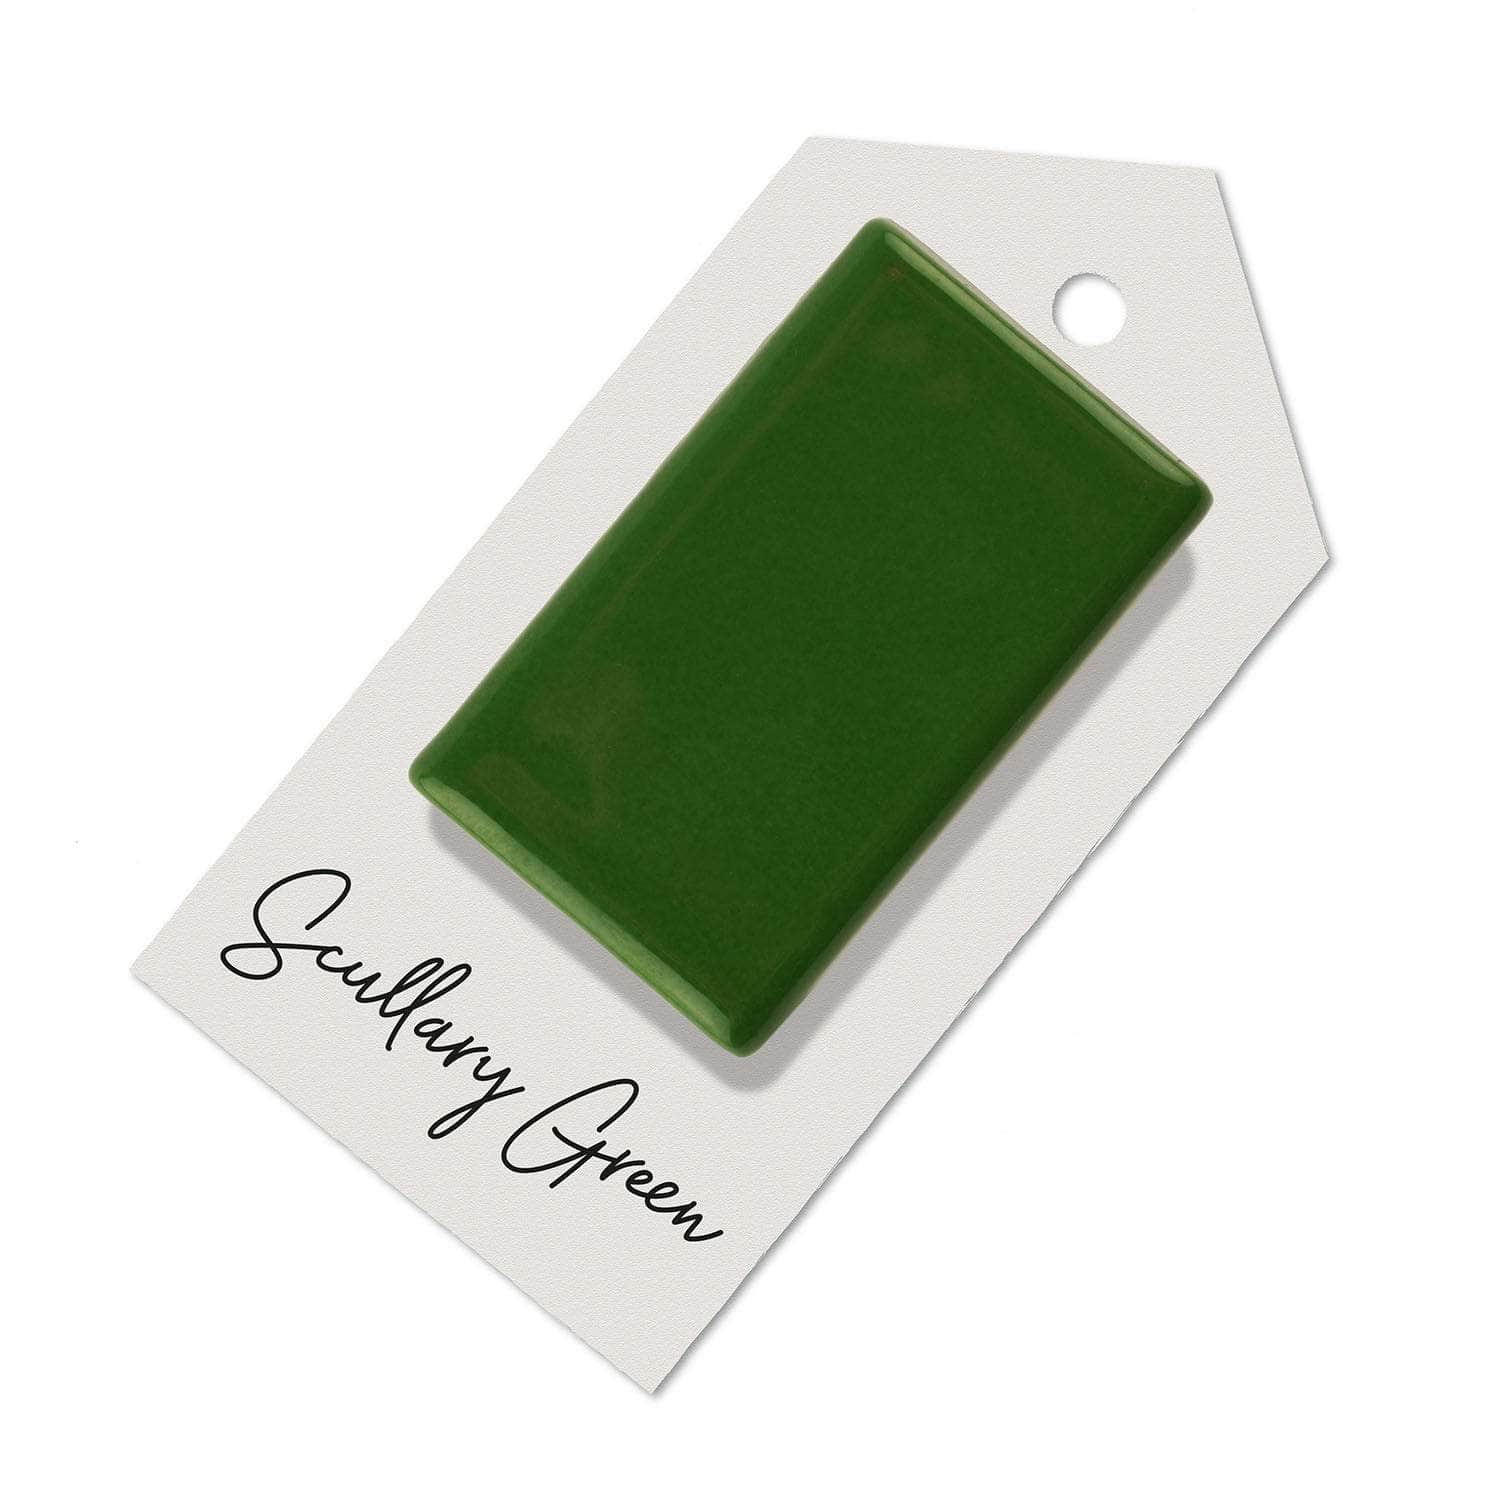 Scullery green sample for Aga range cooker re-enamelling & reconditioned cookers